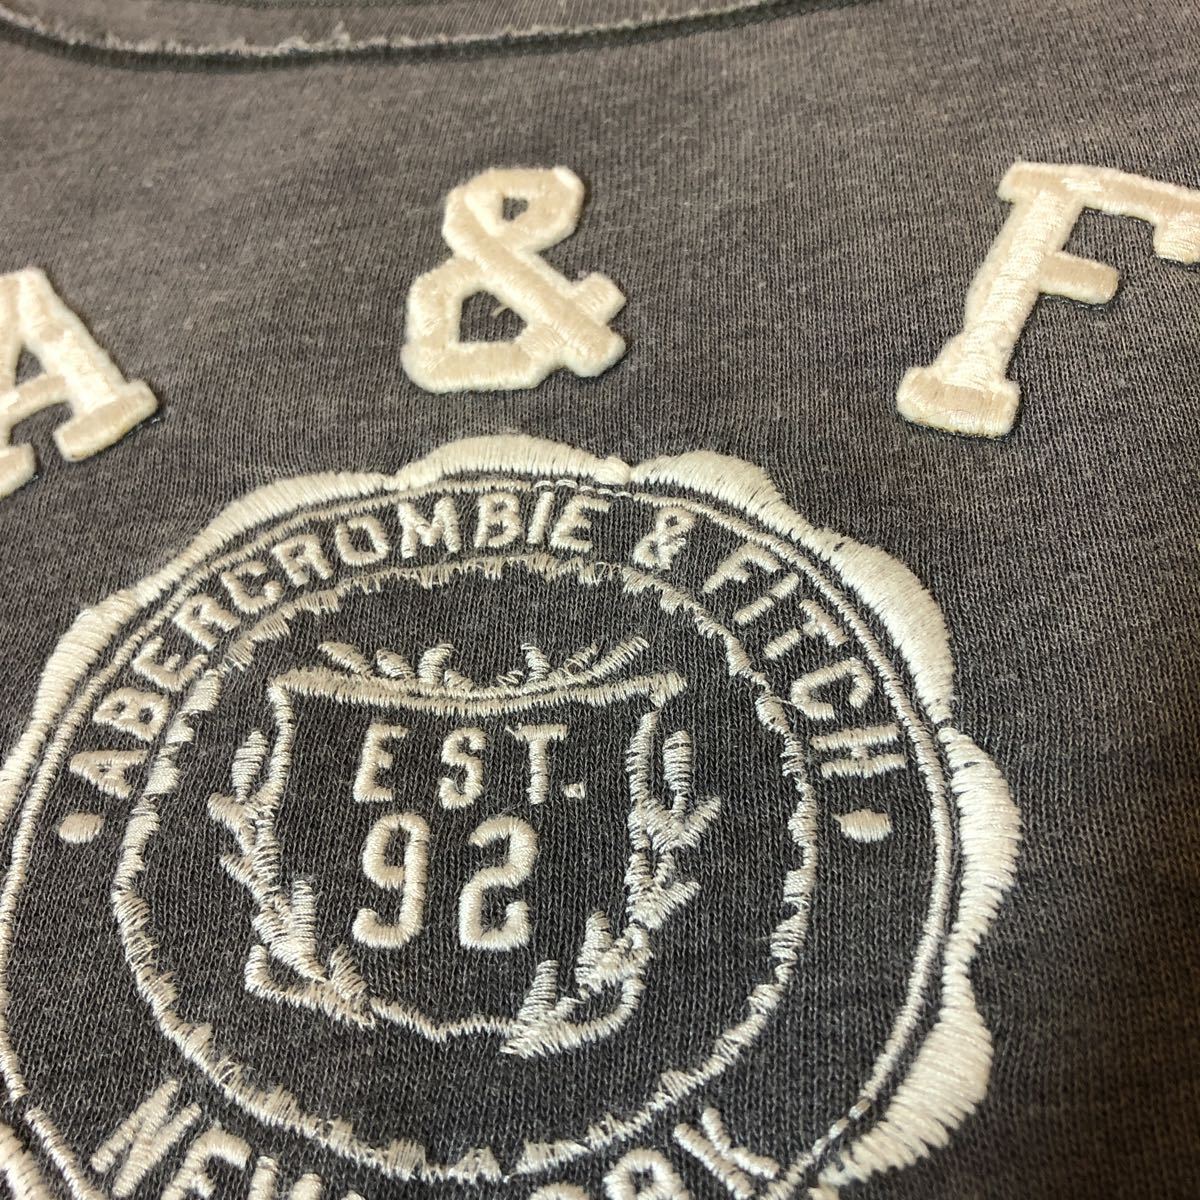  Abercrombie & Fitch abercrombi&fitch lady\'s S sweat used pi ring * some stains have Old school used damage processing Roth Anne zerus buy genuine article 